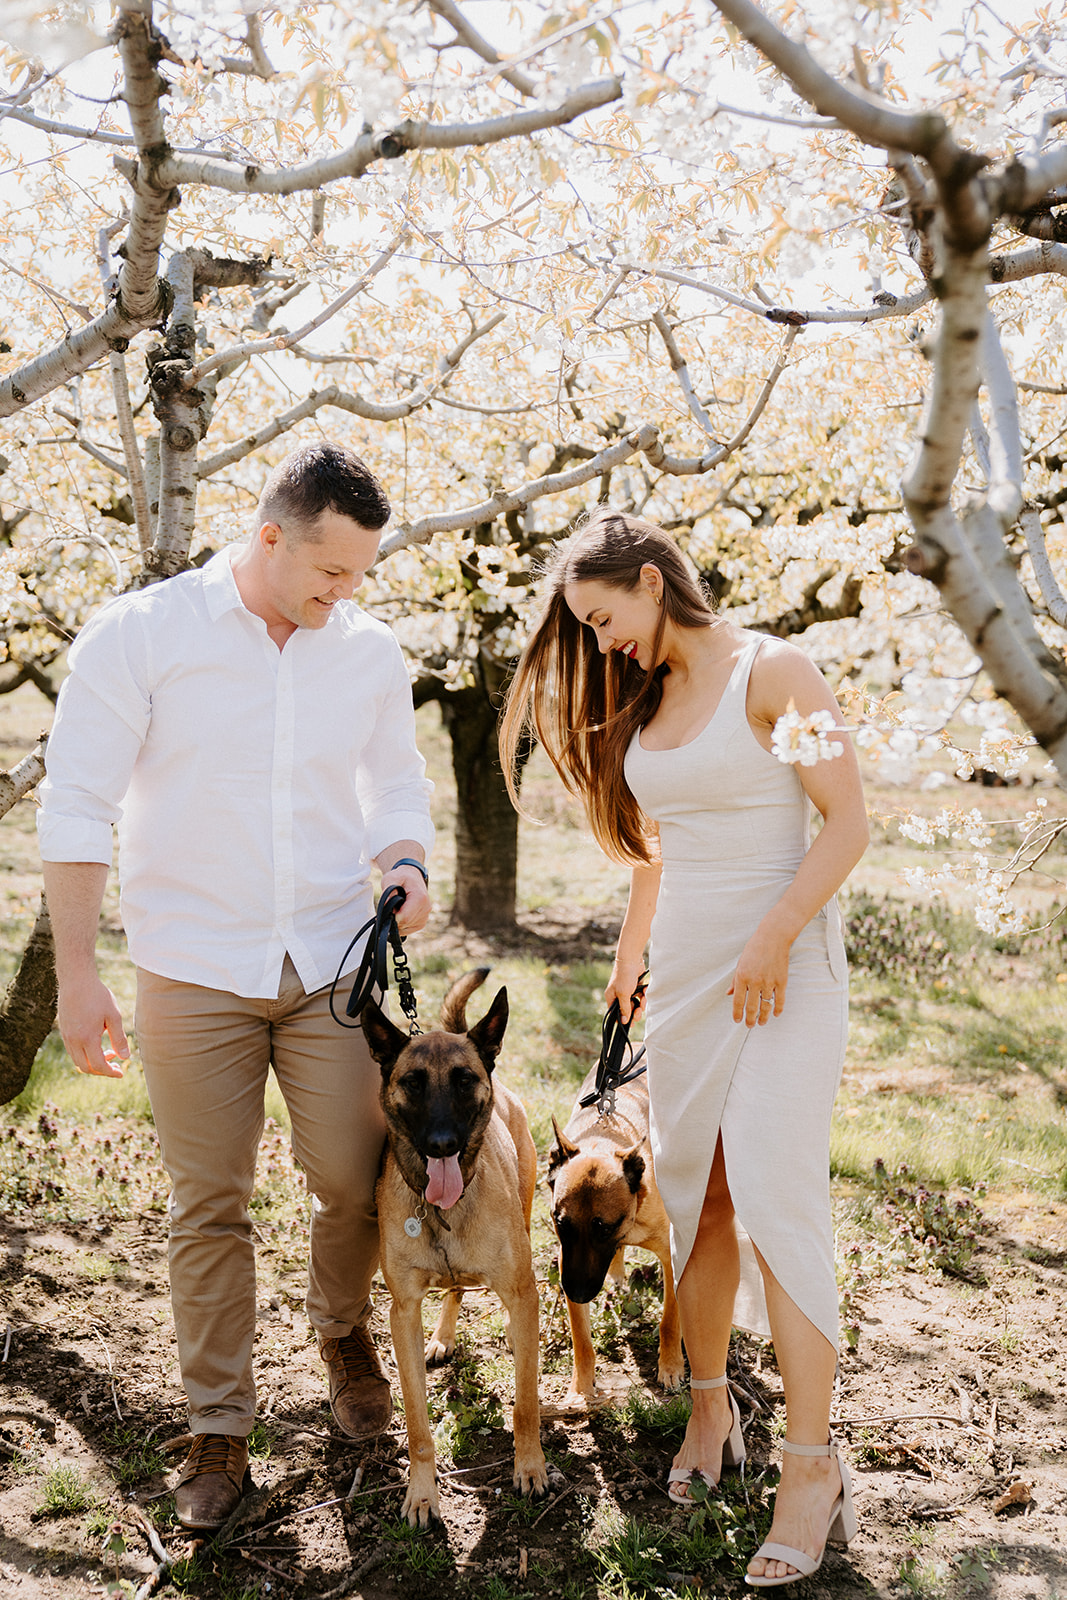 A couple and two dogs standing underneath a cherry blossom tree.  Couple are looking at their dogs.